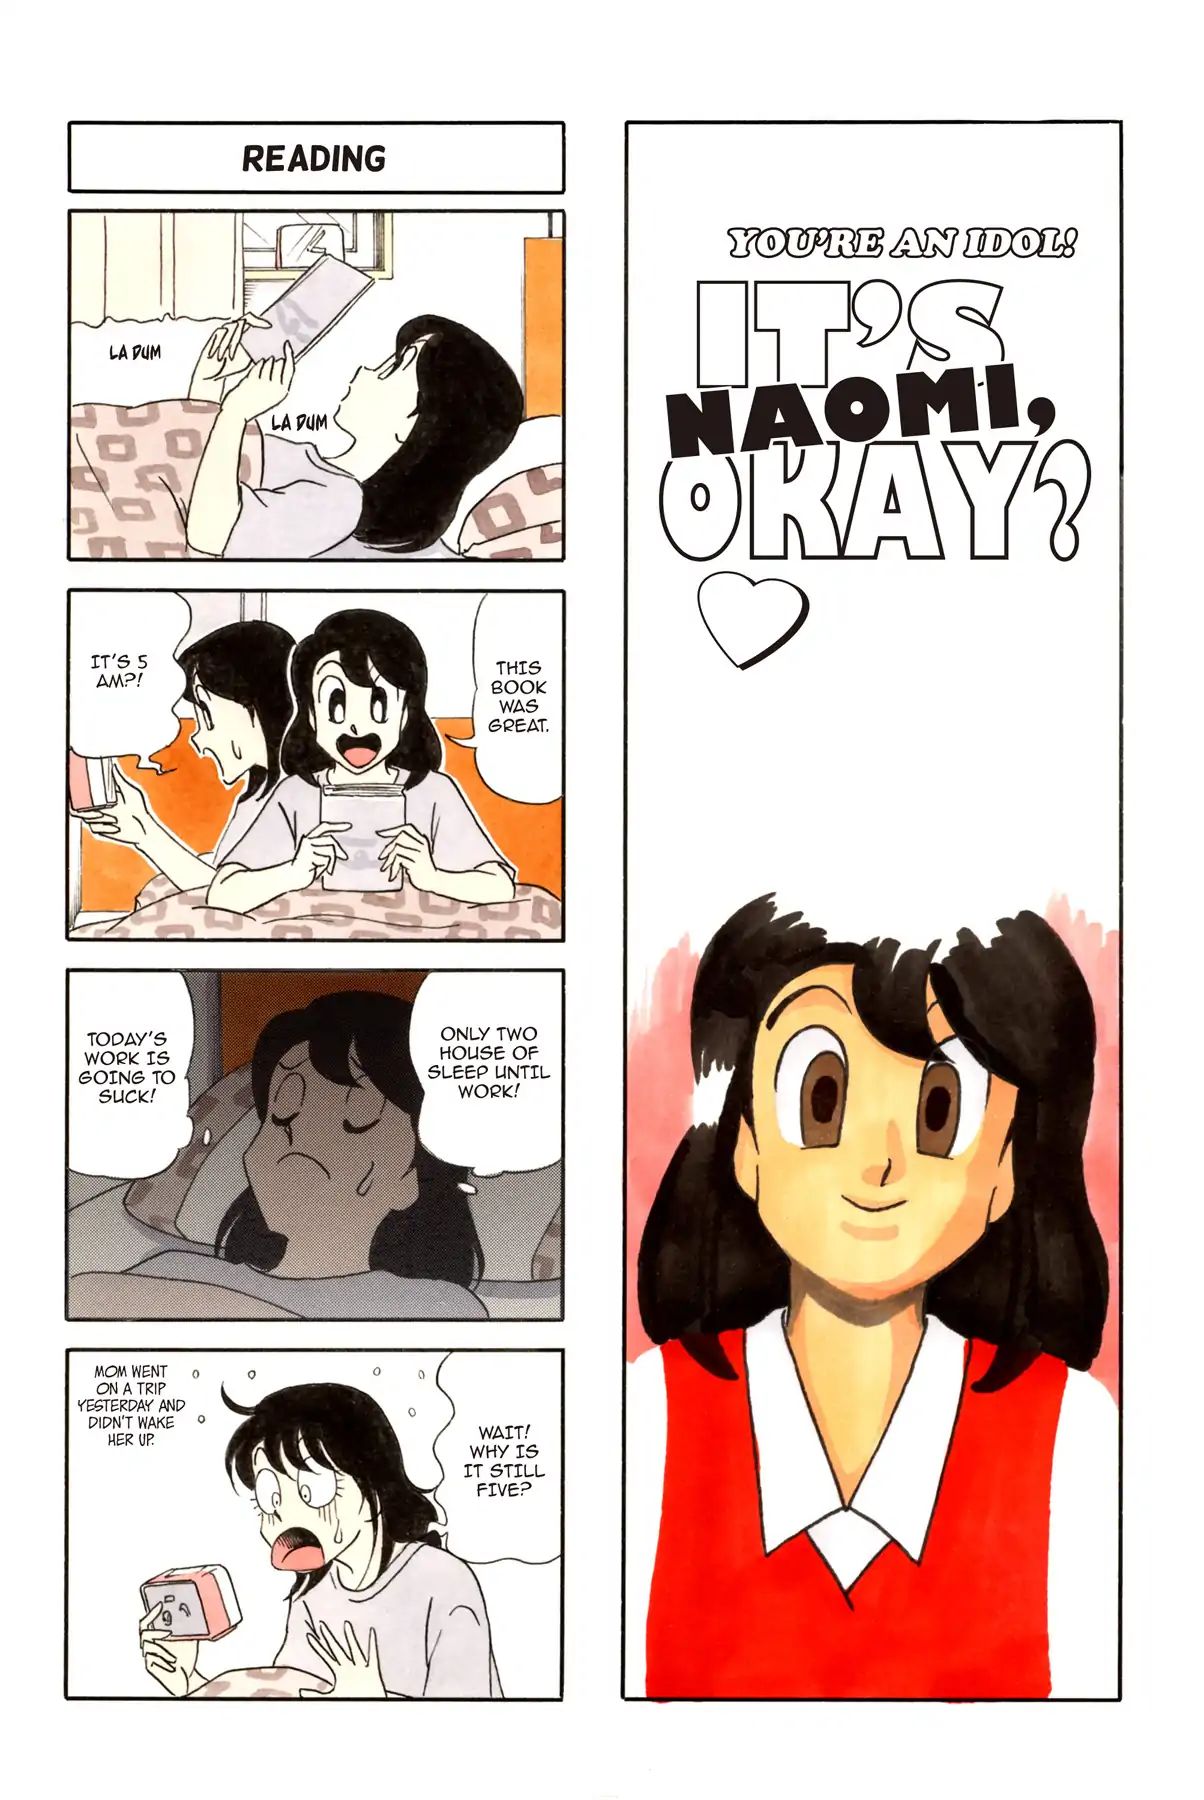 It's Naomi, Okay? After 16 Chapter 11 #1